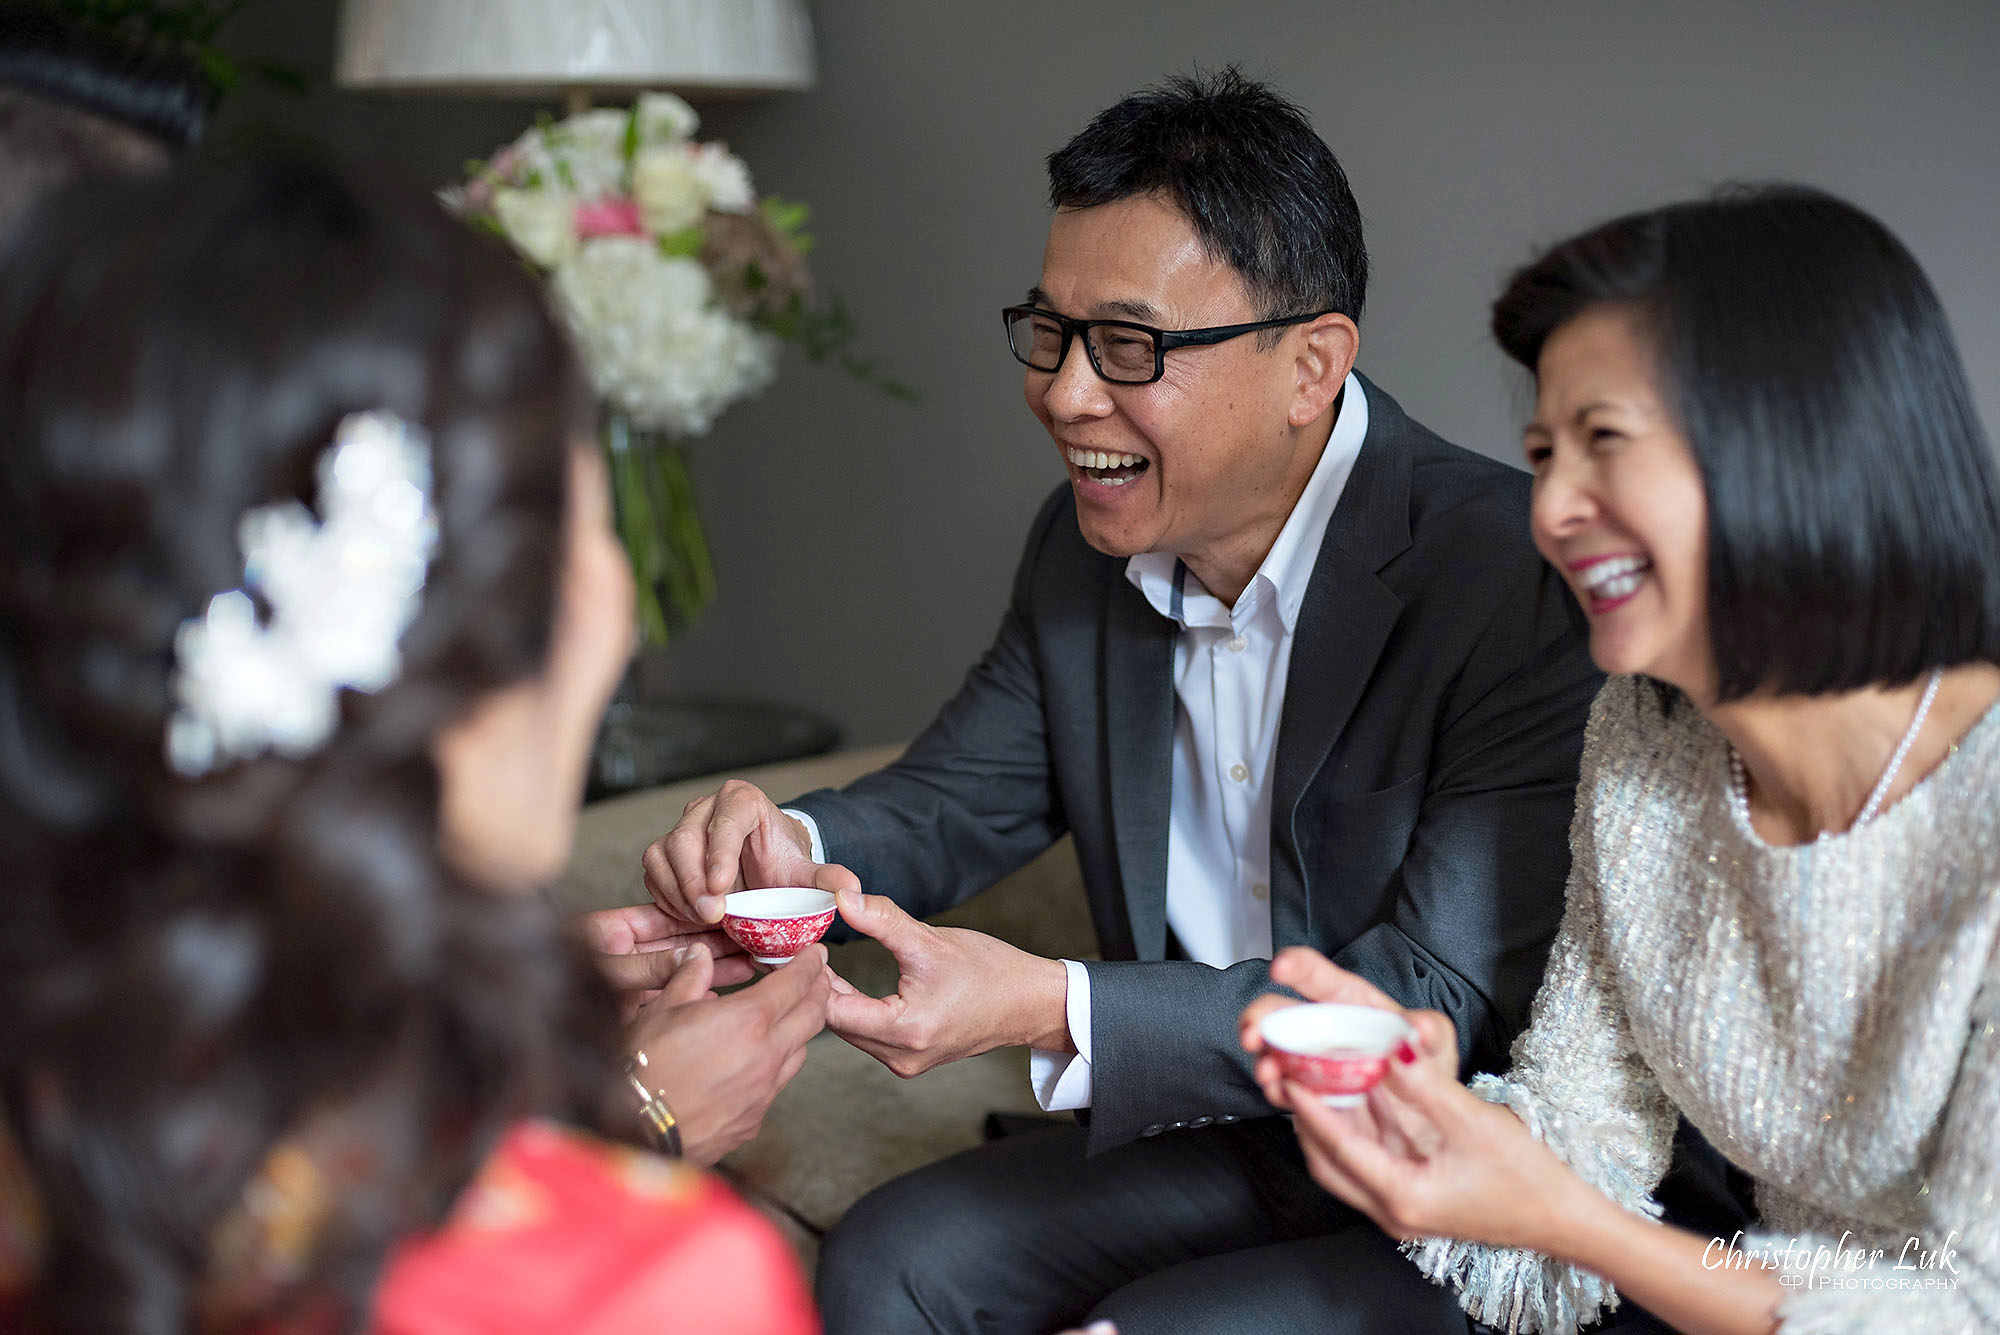 Christopher Luk Photography Toronto Wedding Photographer Chinese Tea Ceremony Bride Groom Uncle Aunt Extended Family Candid Natural Photojournalistic Happy Smile